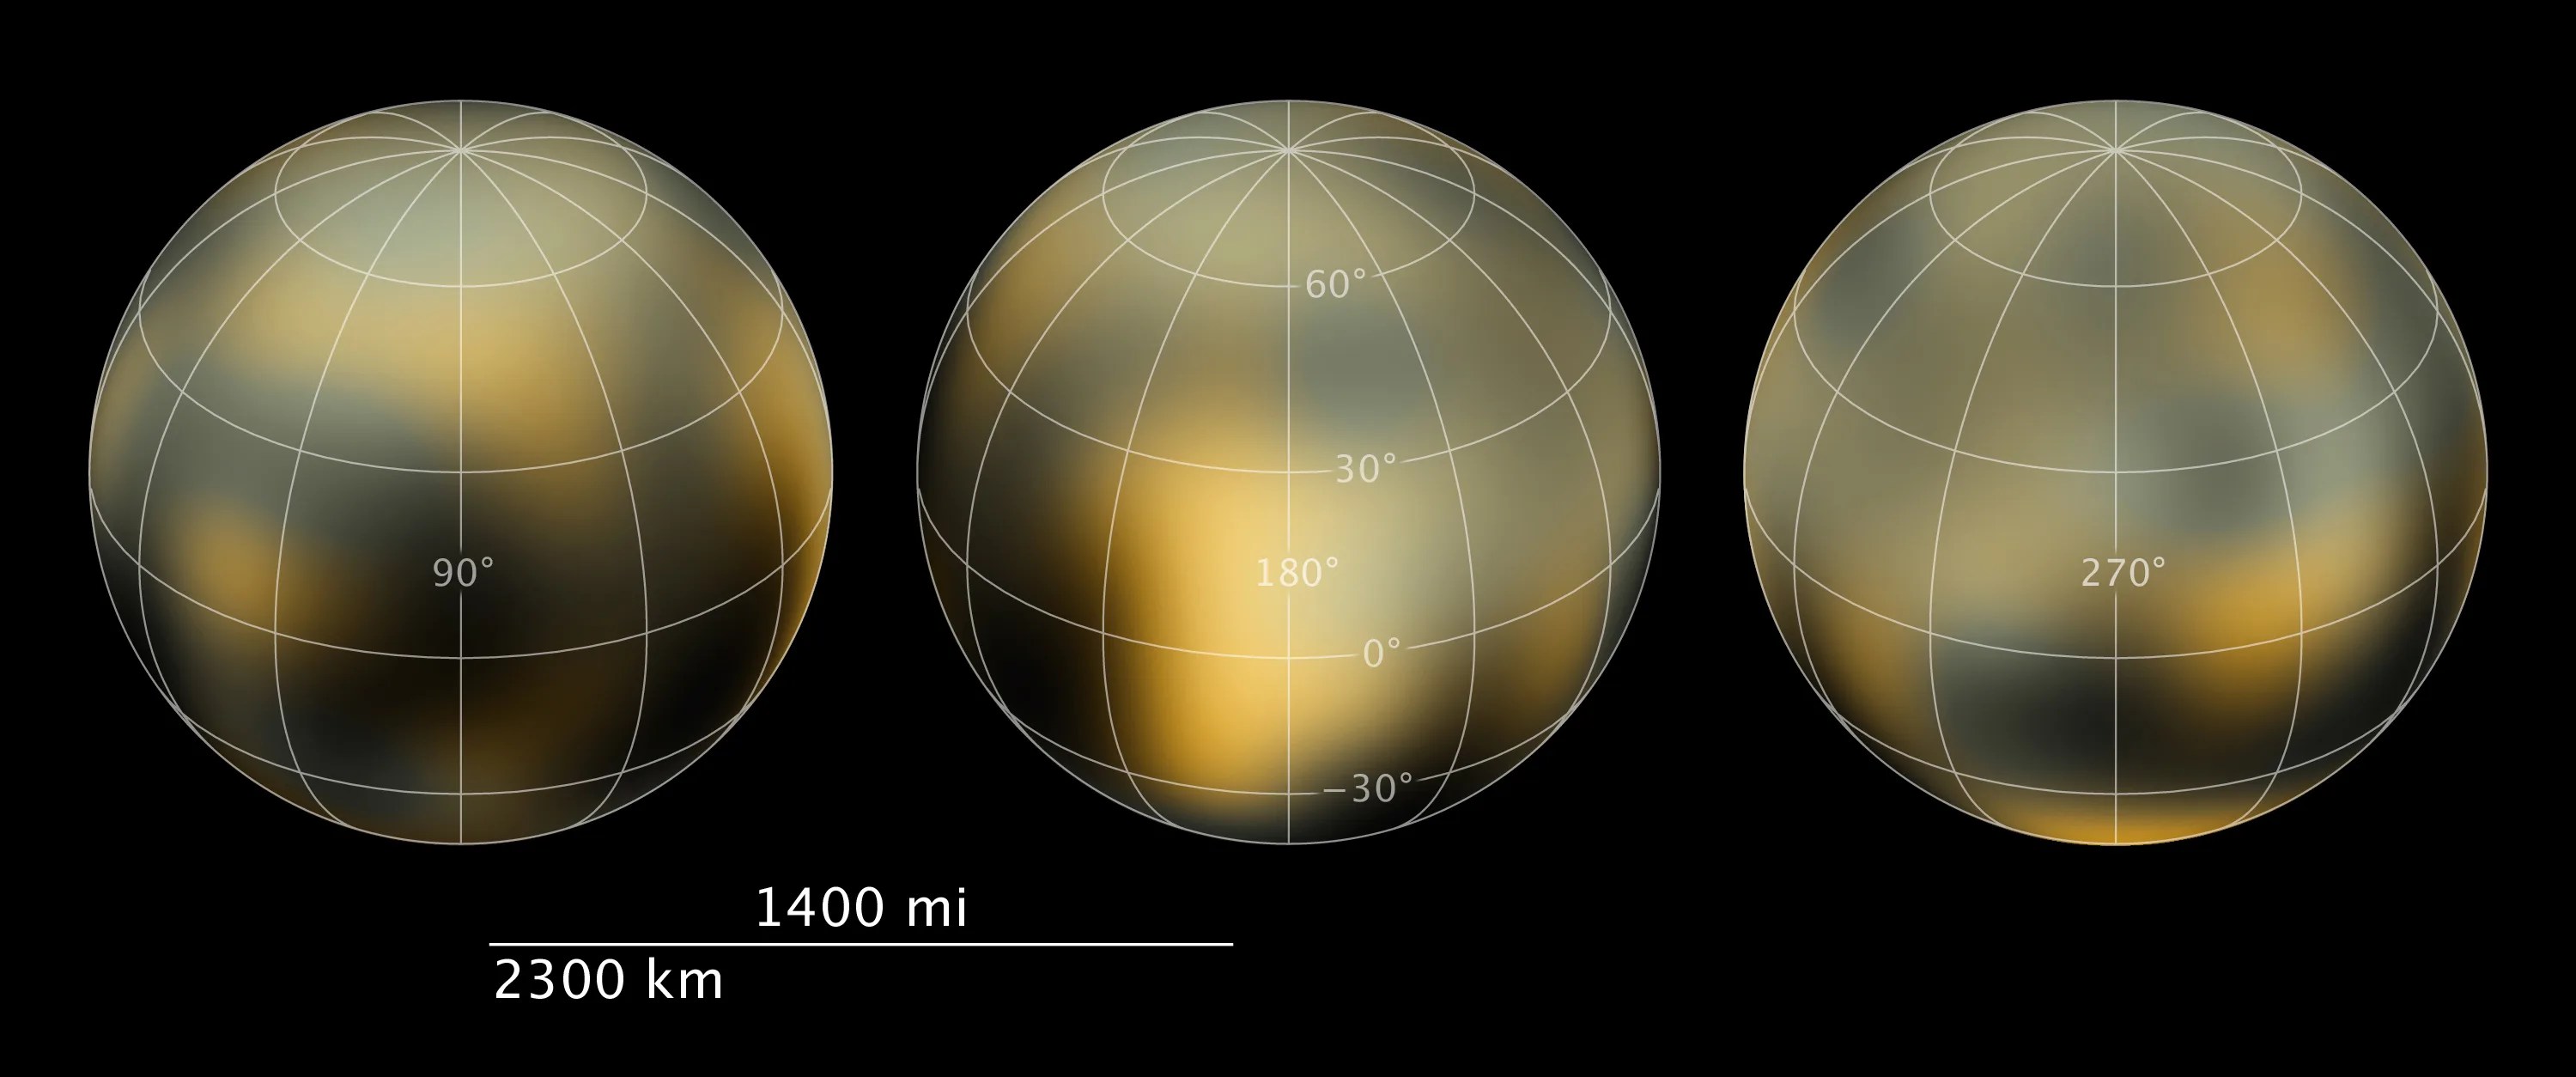 Hubble surface brightness (albedo) observations of Pluto, mapped over spheres. Three spheres holding Hubble's albedo observations of Pluto. A grid representing the longitude and latitude of the planet is superimposed on the sphere over the Hubble observations.